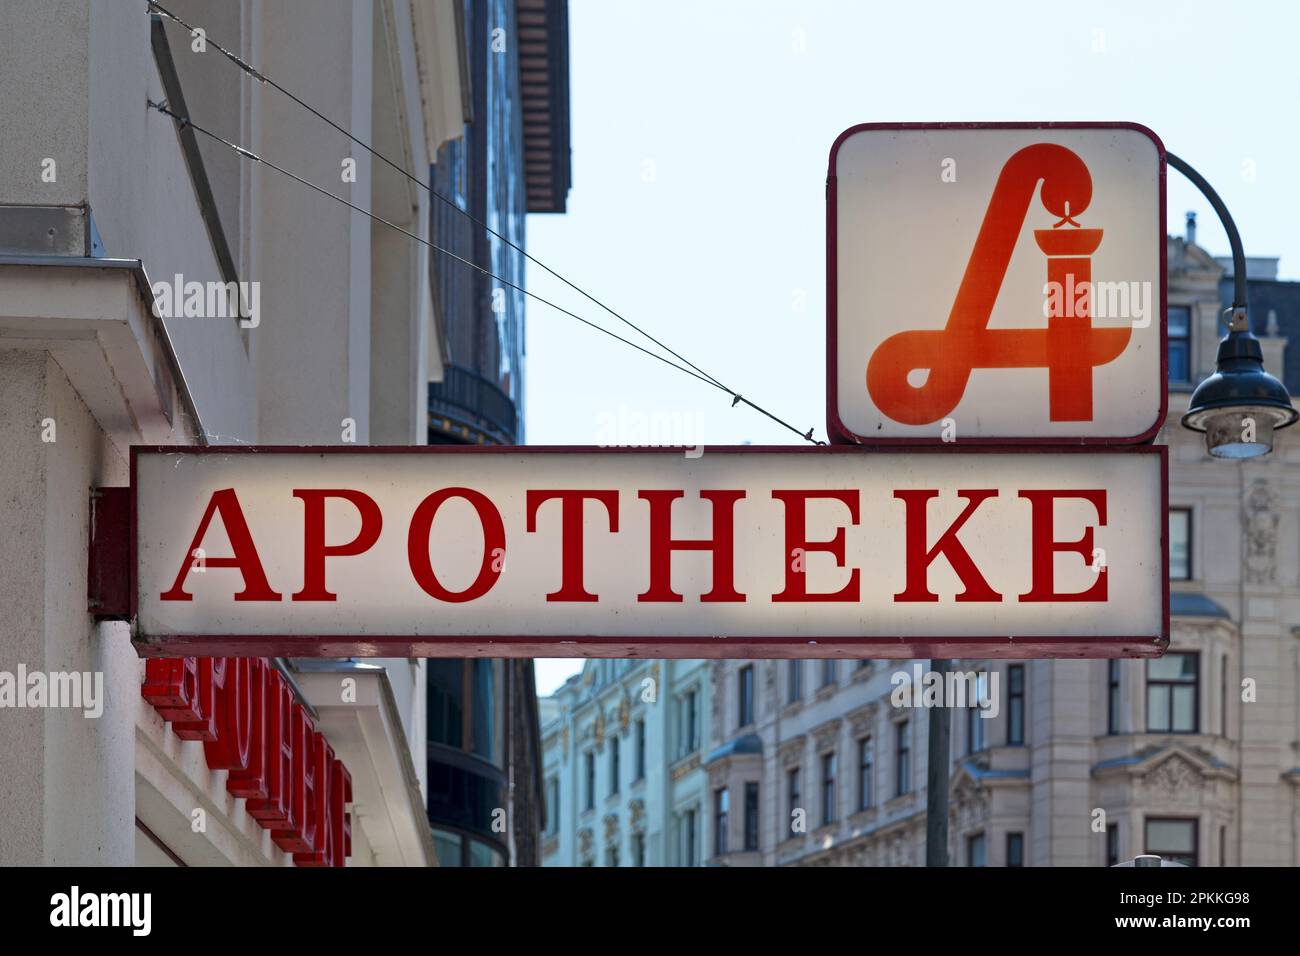 Austrian pharmacy displaying the traditional pharmacy sign above a second sign 'Apotheke', meaning in English 'Pharmacy'. Stock Photo